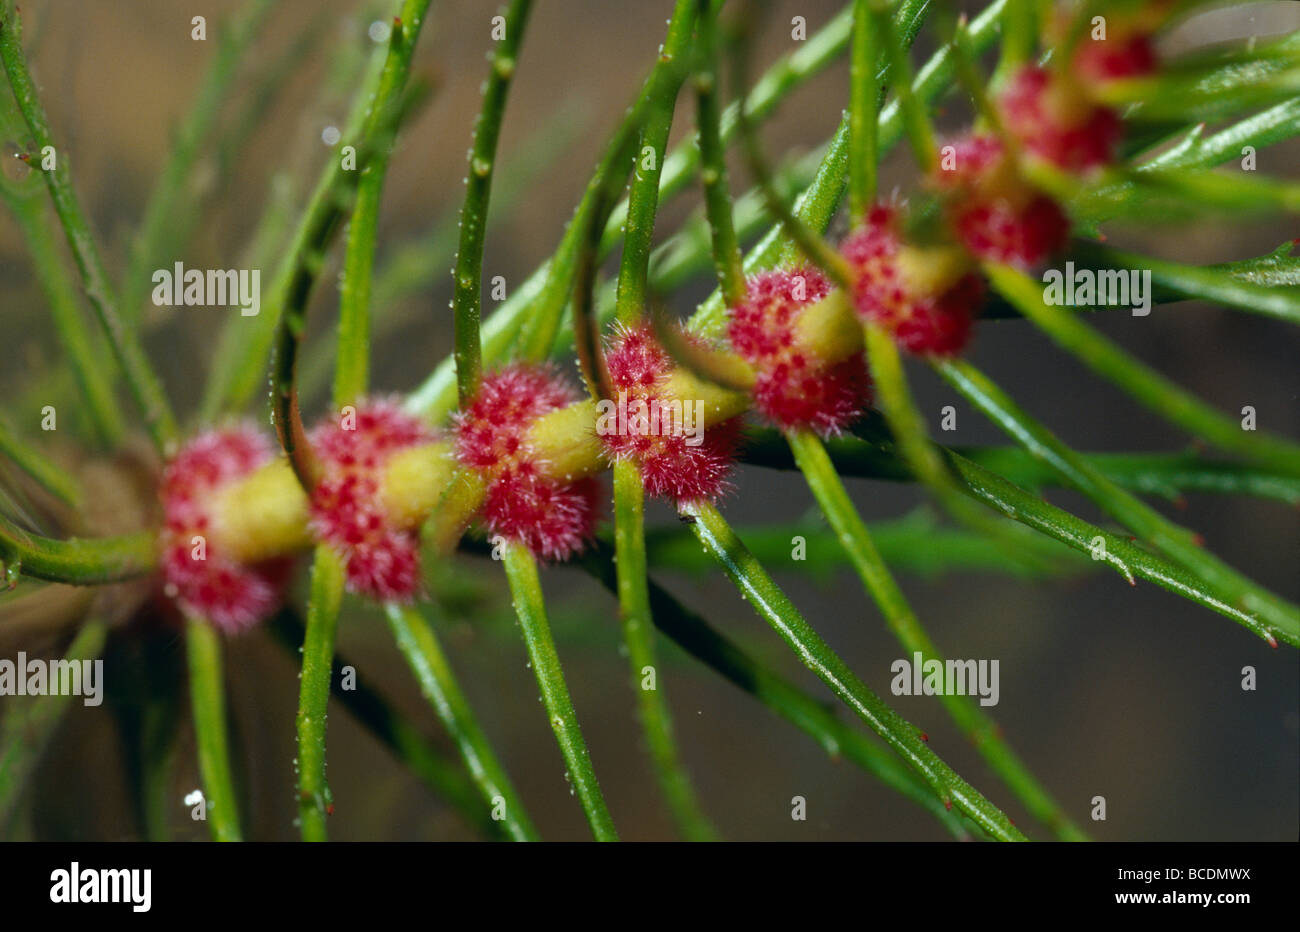 Tiny bright red flowers cluster around the stem of an aquatic plant. Stock Photo